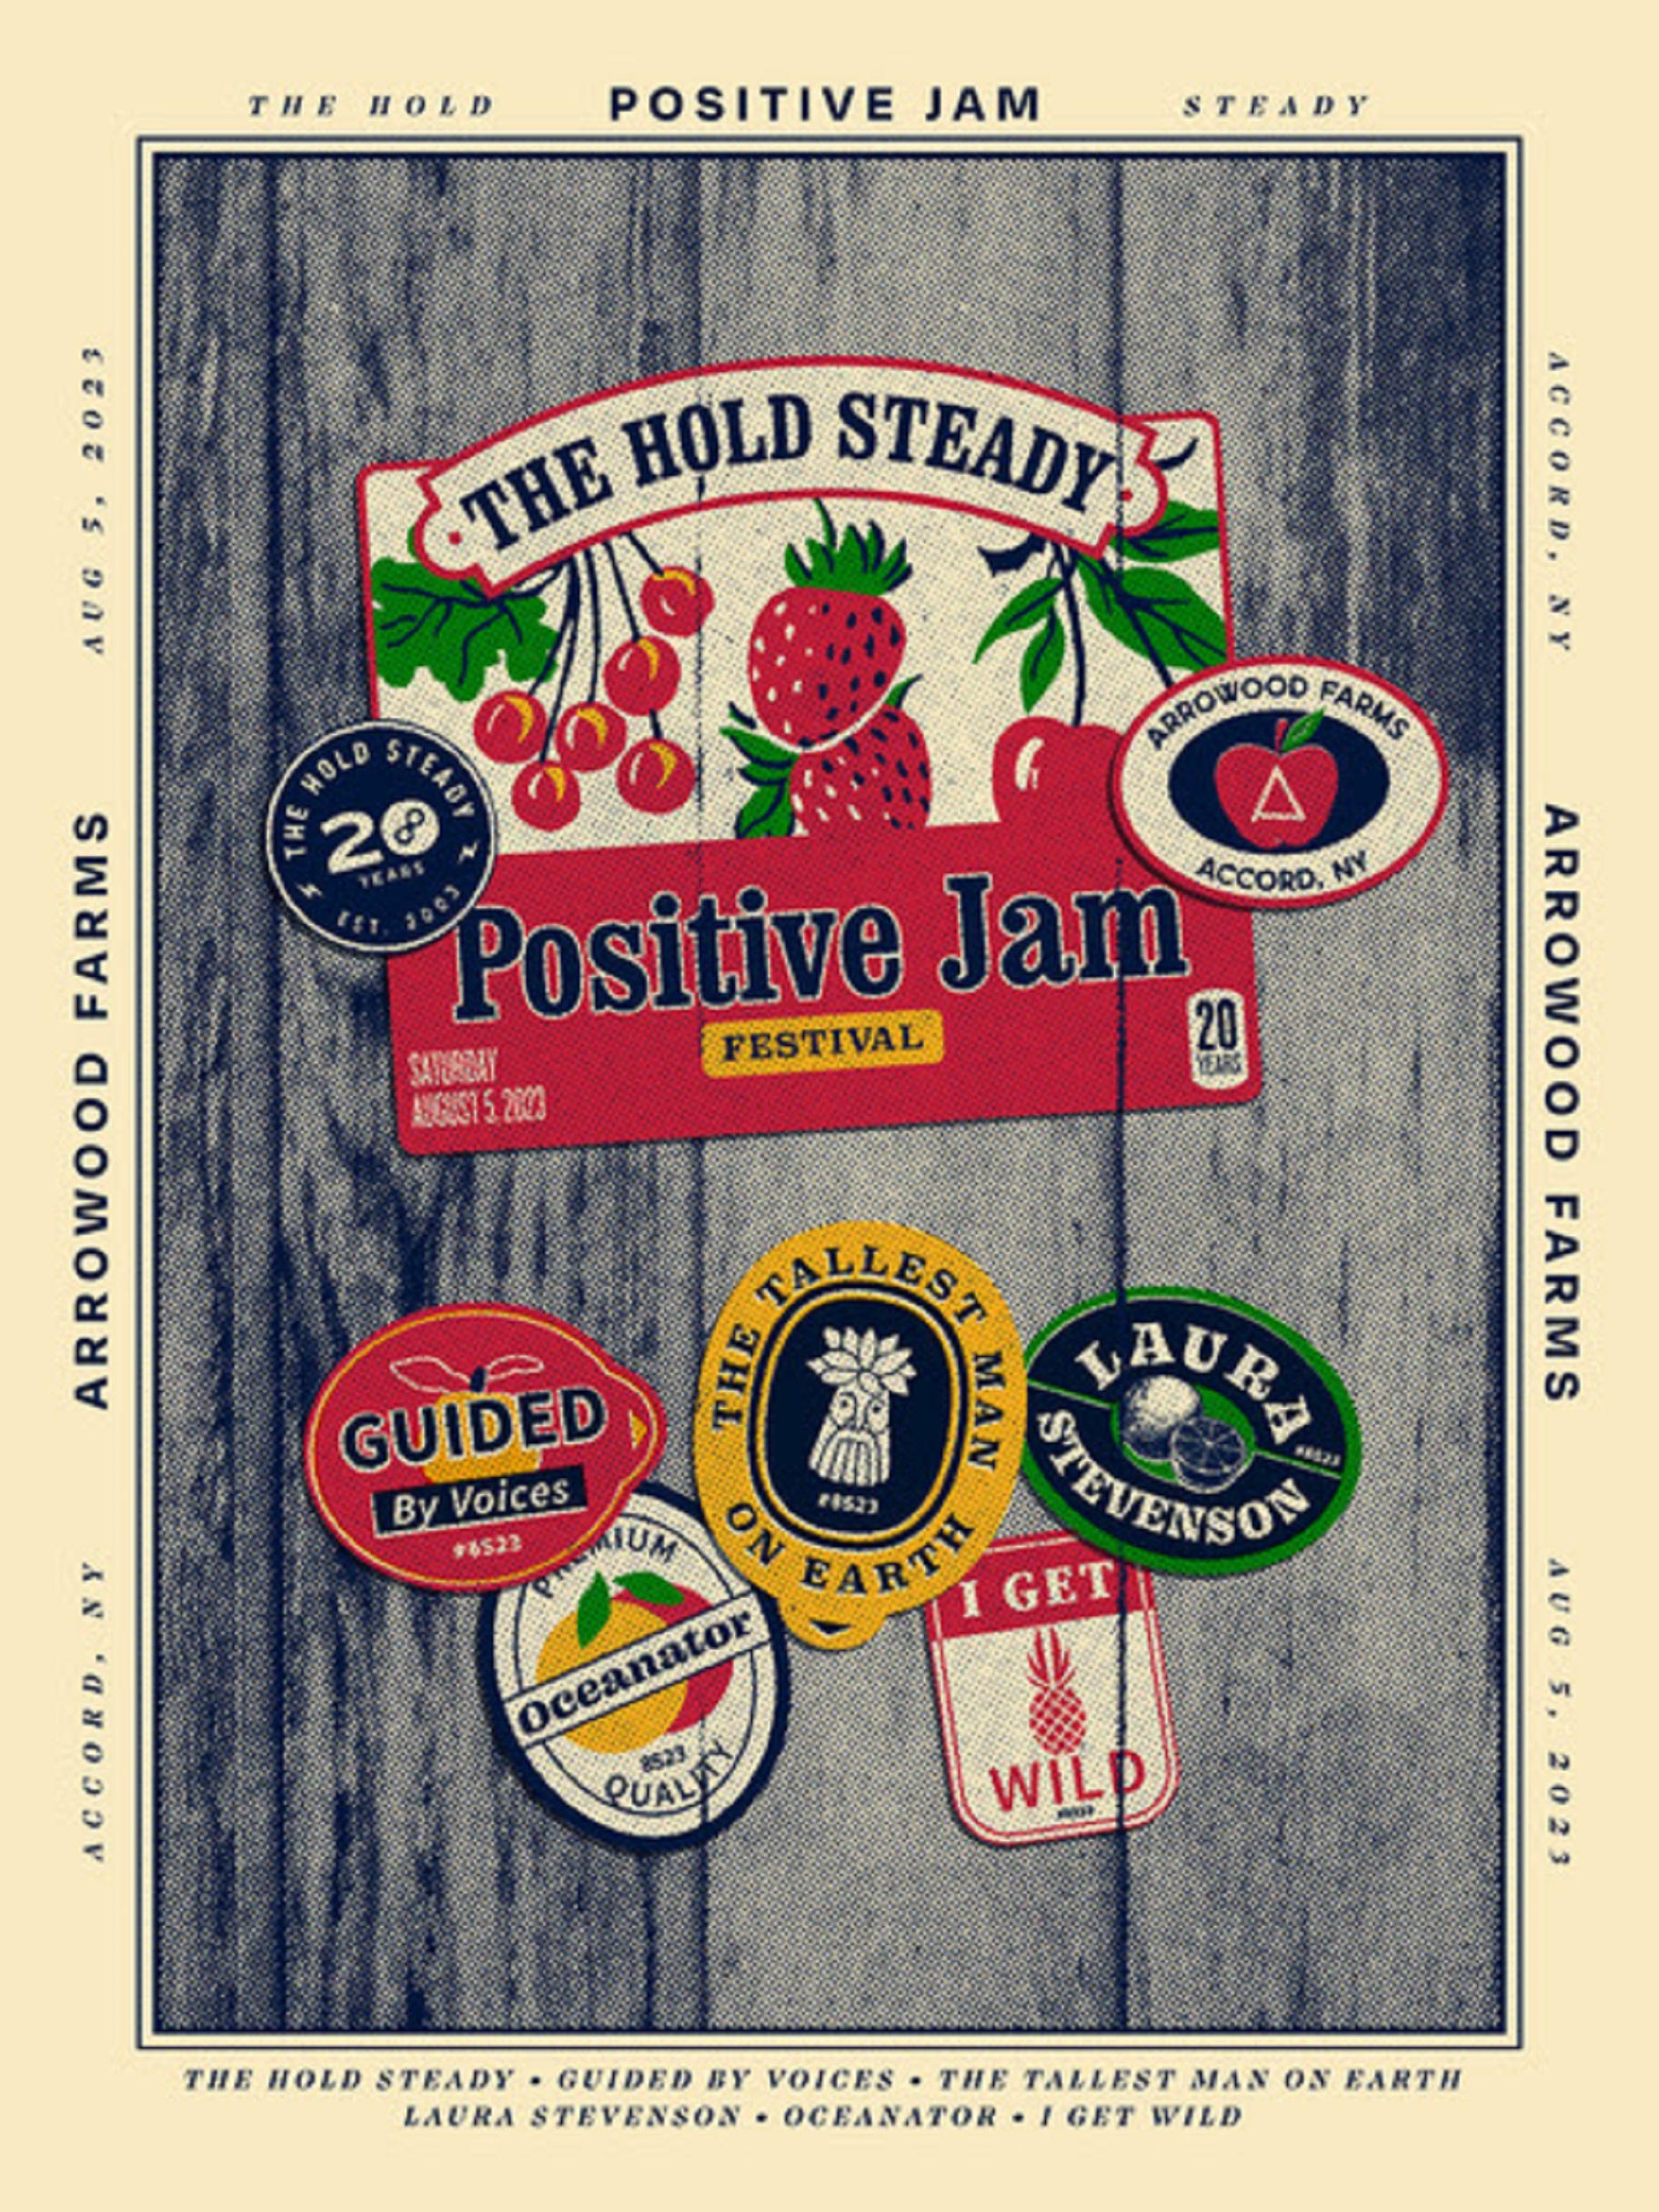 The Hold Steady present inaugural "Positive Jam" festival lineup